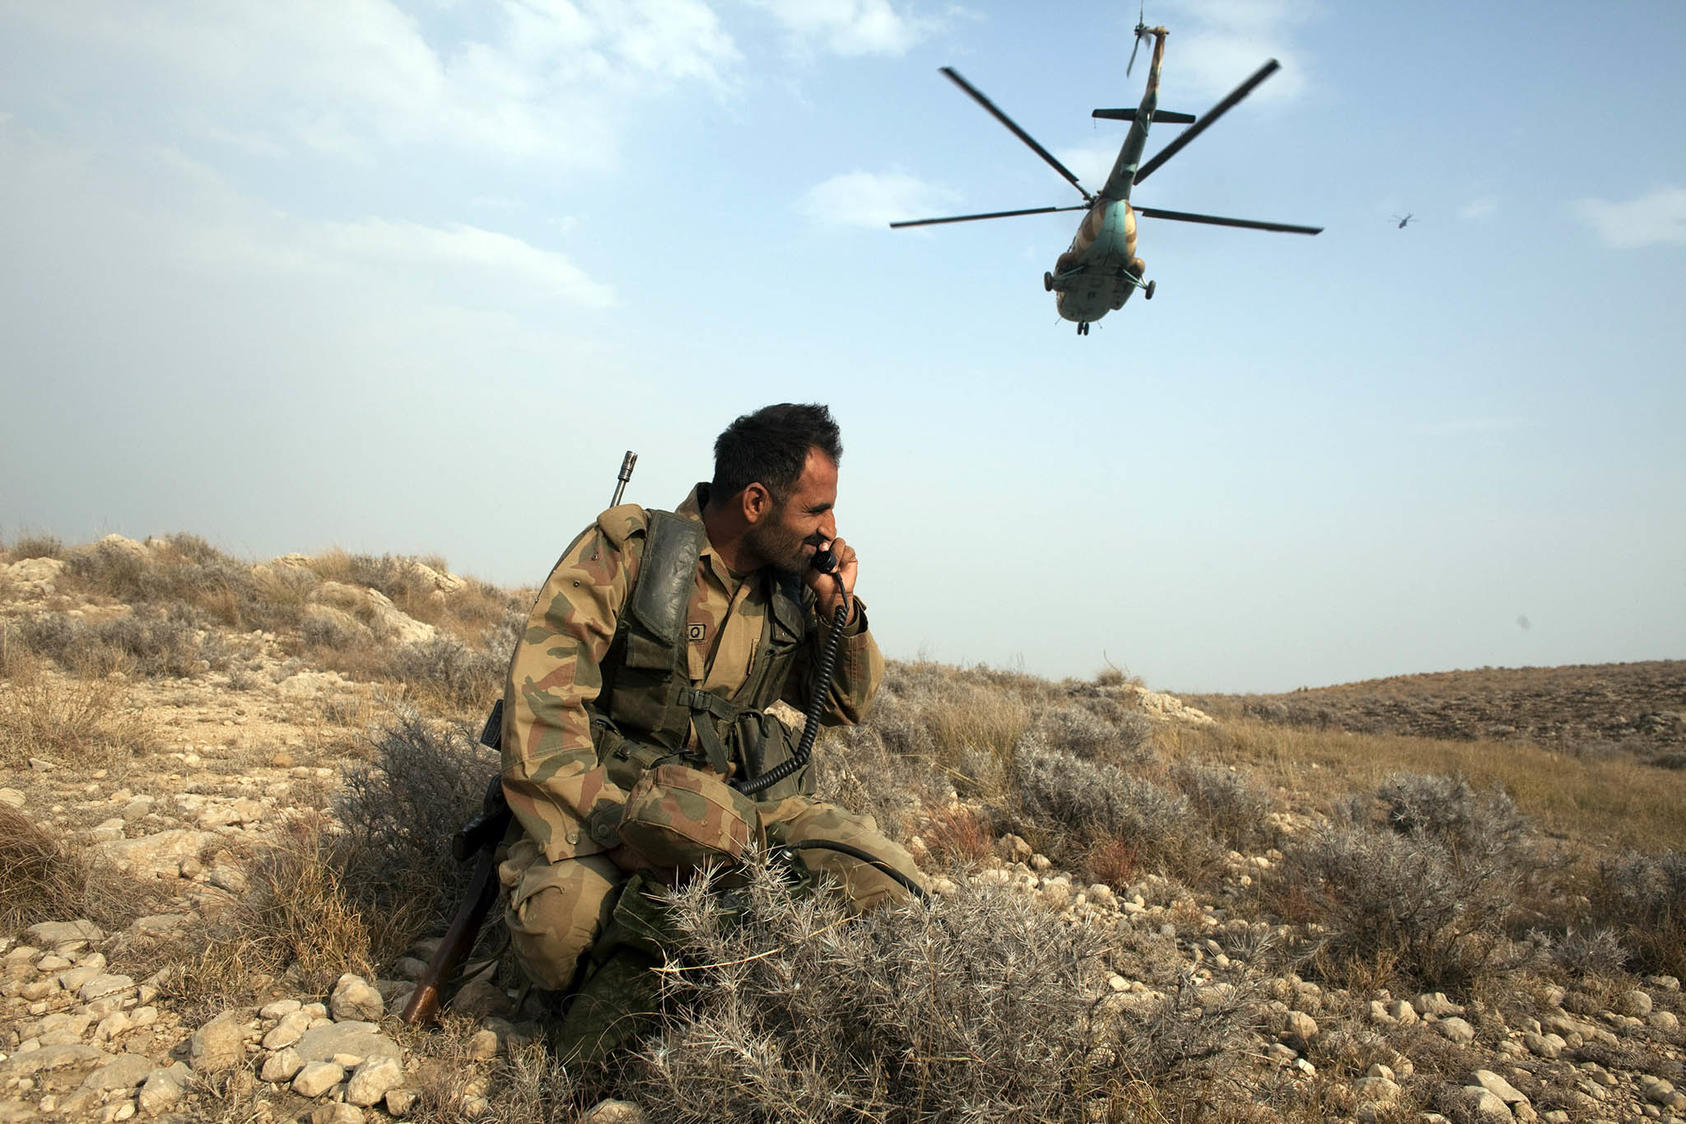 A Pakistani soldier in South Waziristan, Pakistan, 2009. South Waziristan was part of Federally Administrated Tribal Areas that merged with mainland Pakistan in 2018. The TTP want this merger reversed. (Tyler Hicks/The New York Times)